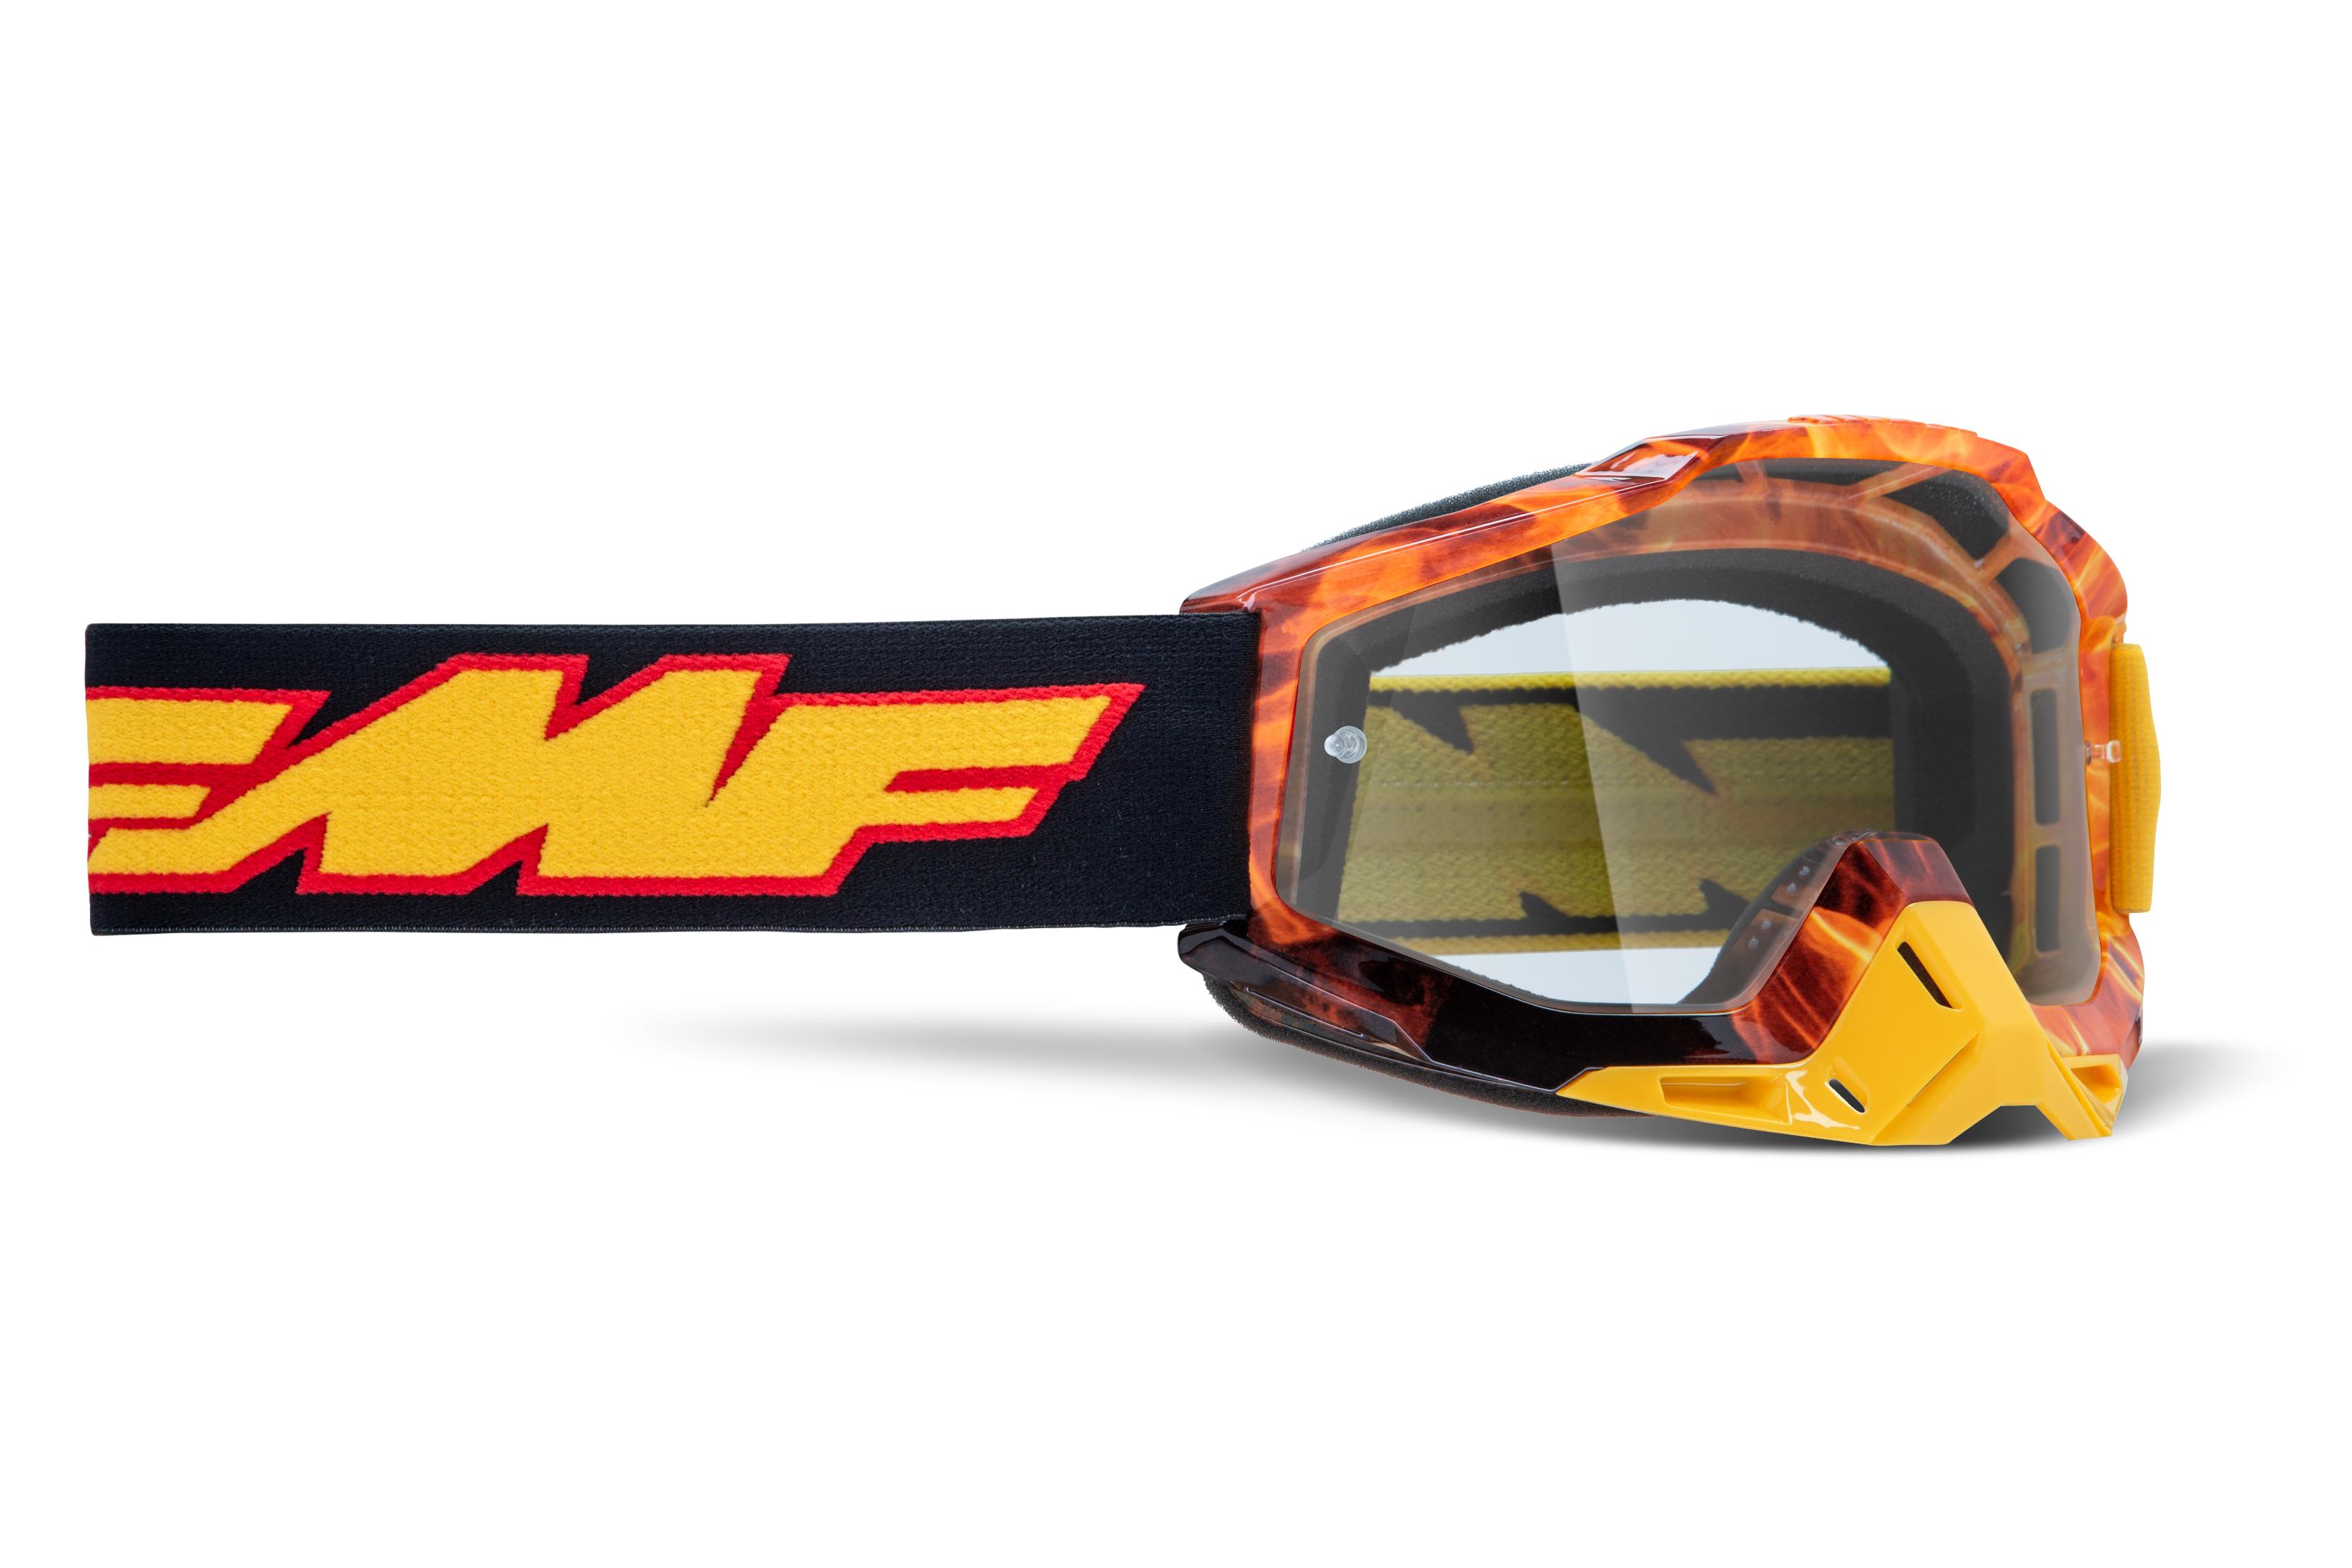 Fmf Vision - Powerbomb Goggle Spark Clear Lens - F-50036-00005